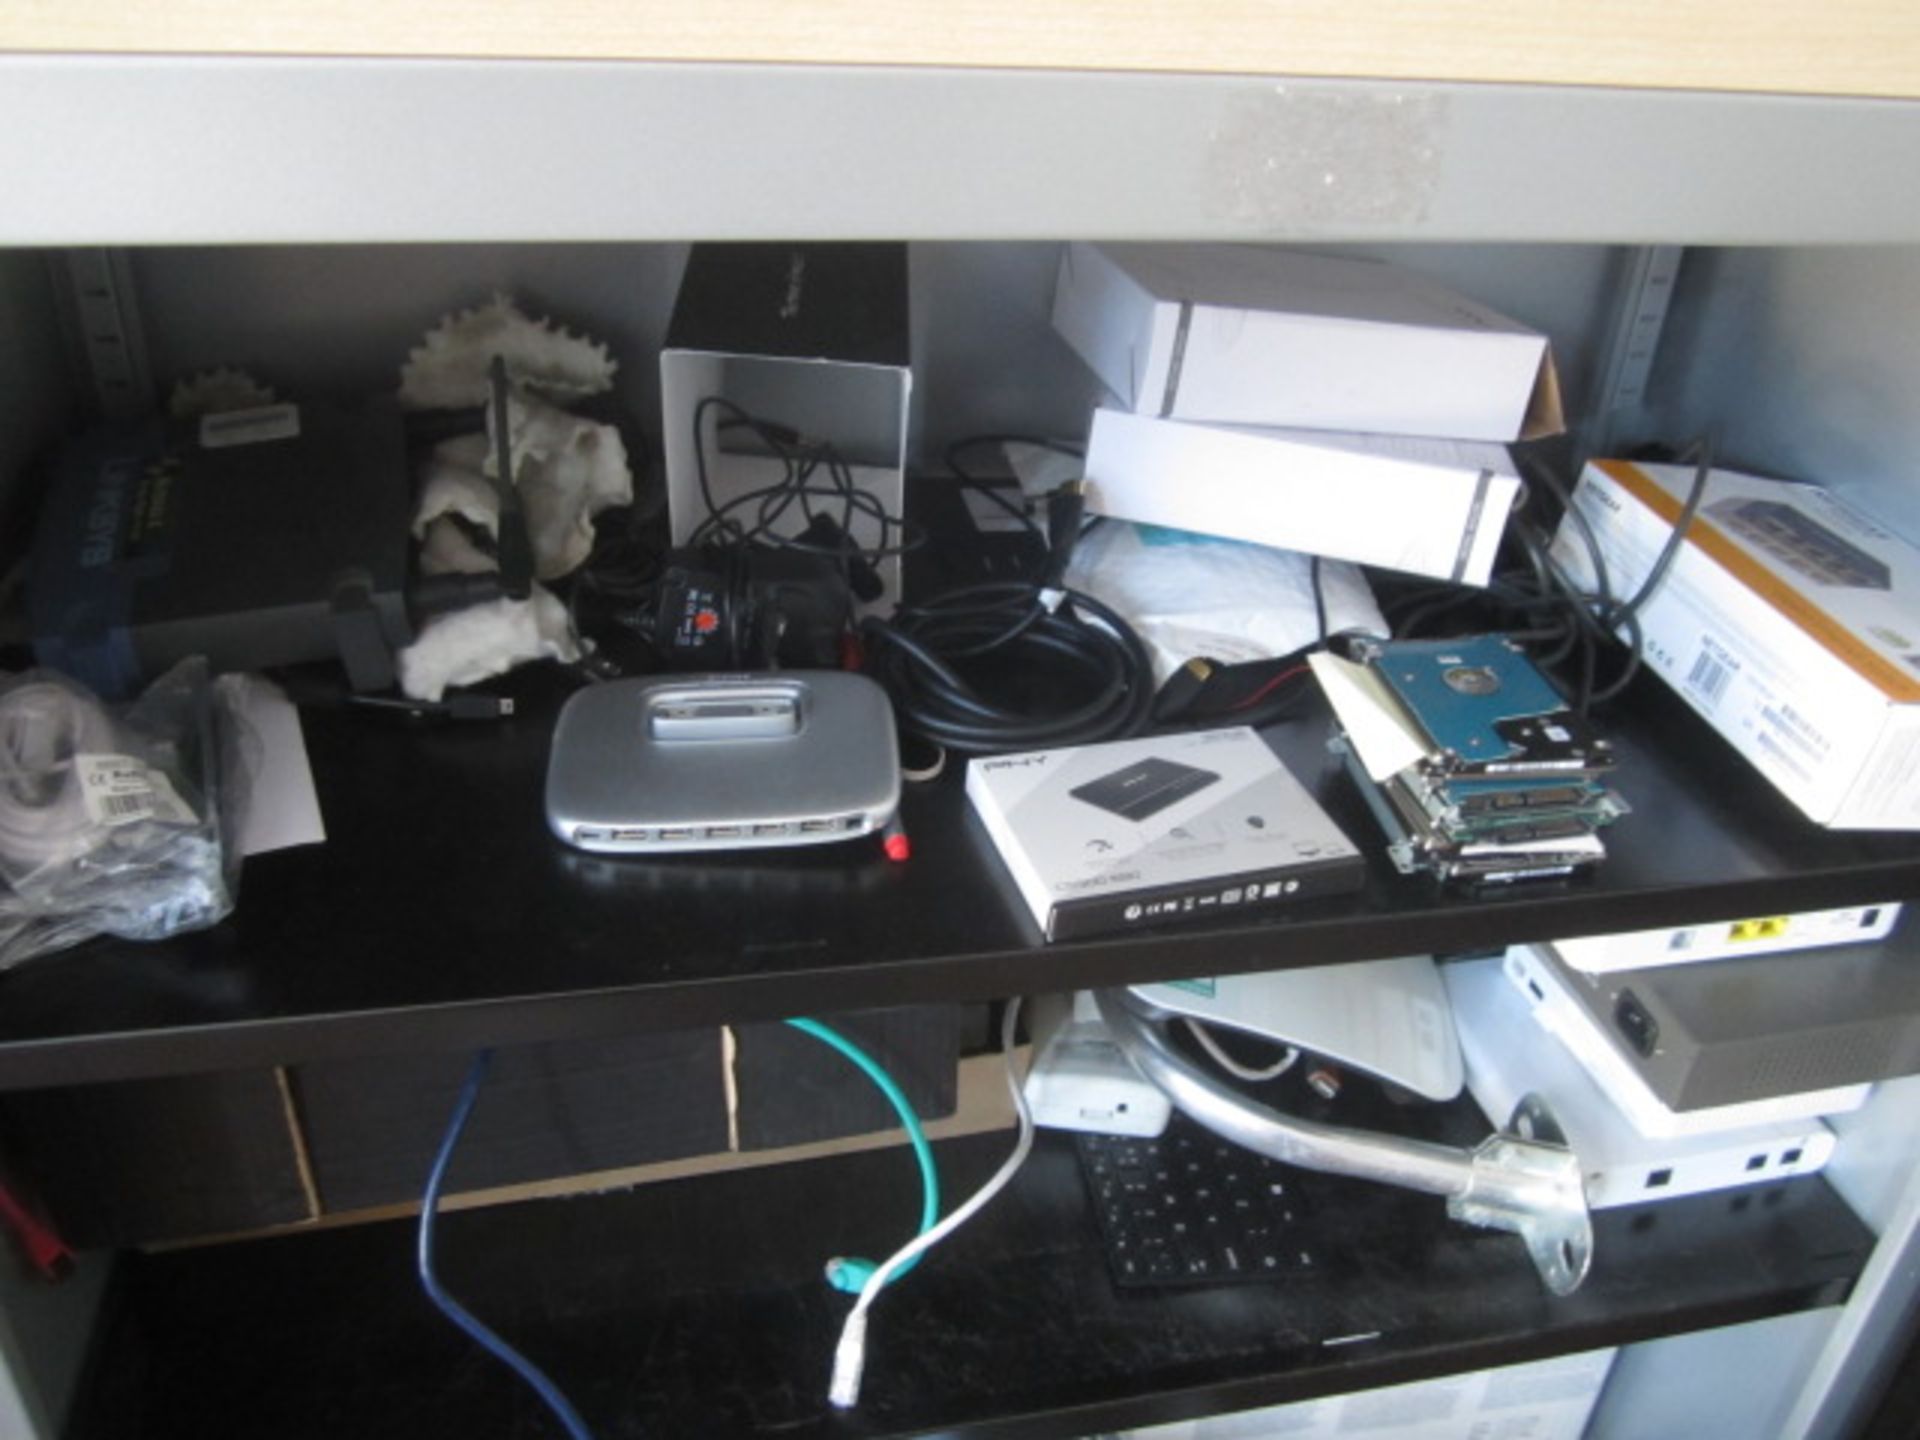 Remaining loose contents of IT equipment including 16 x assorted laptop - spares or repairs, X-VGA - Image 3 of 8